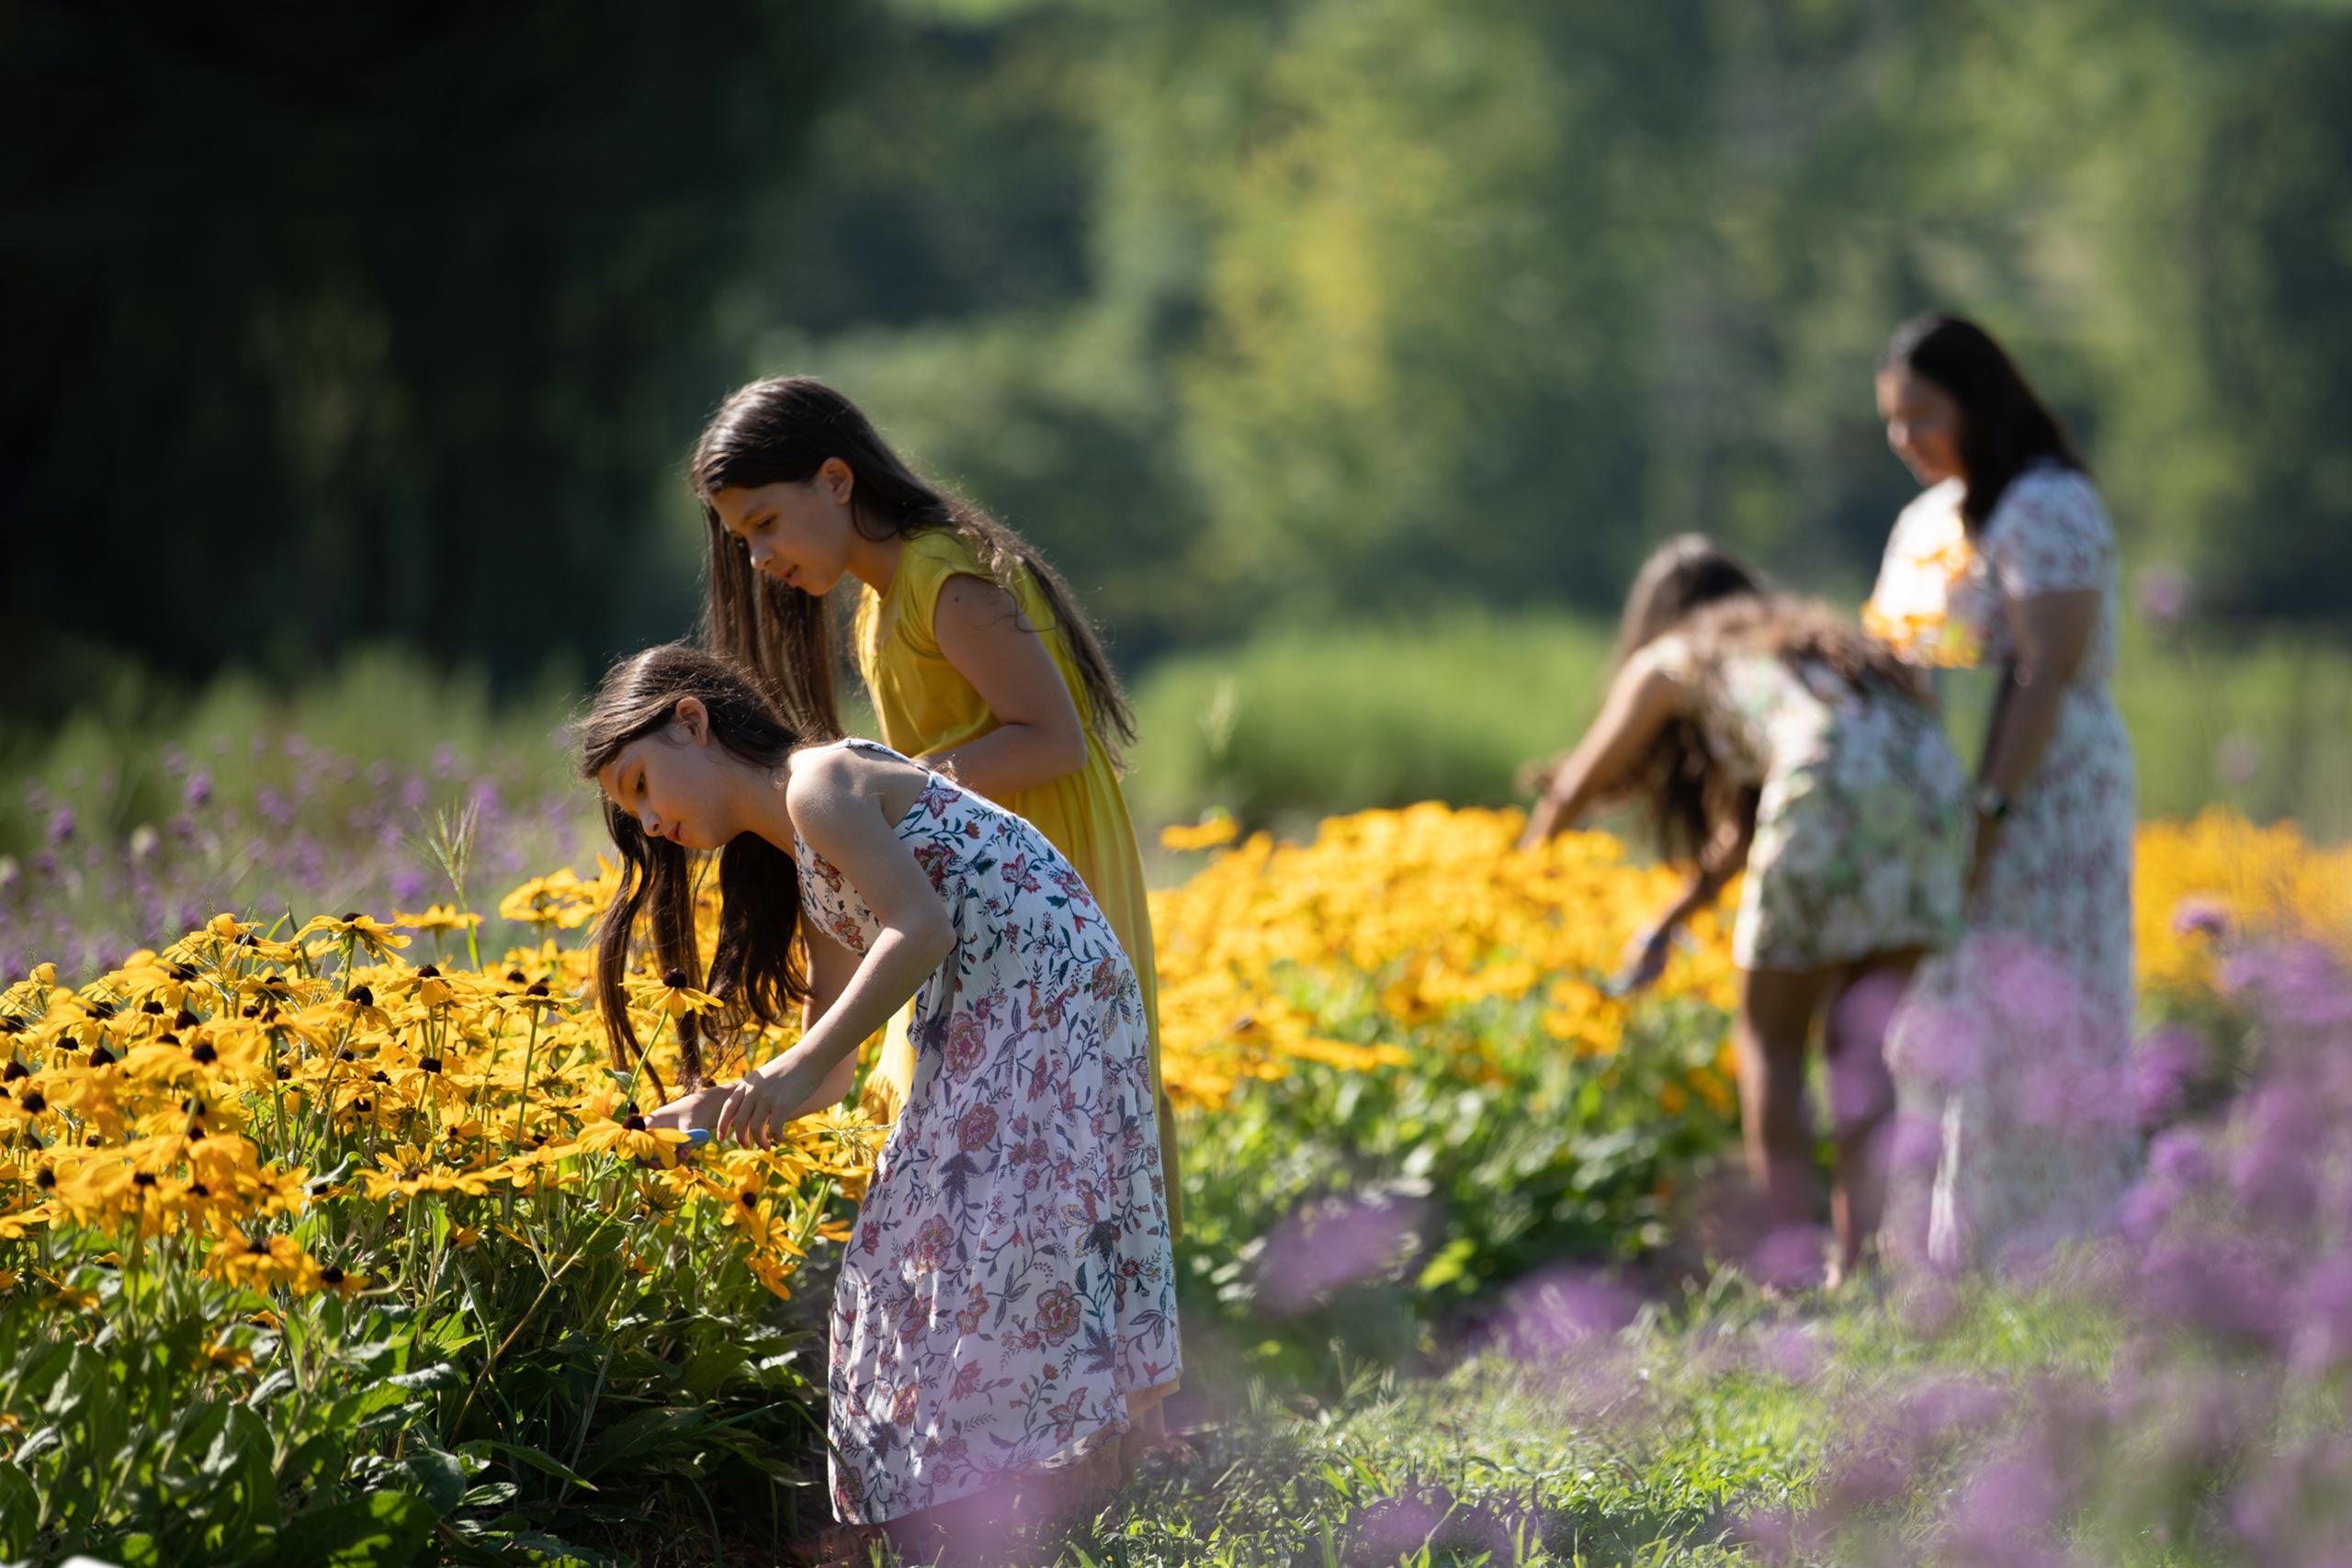 Mom and 3 kids walking through a field of yellow and purple flowers